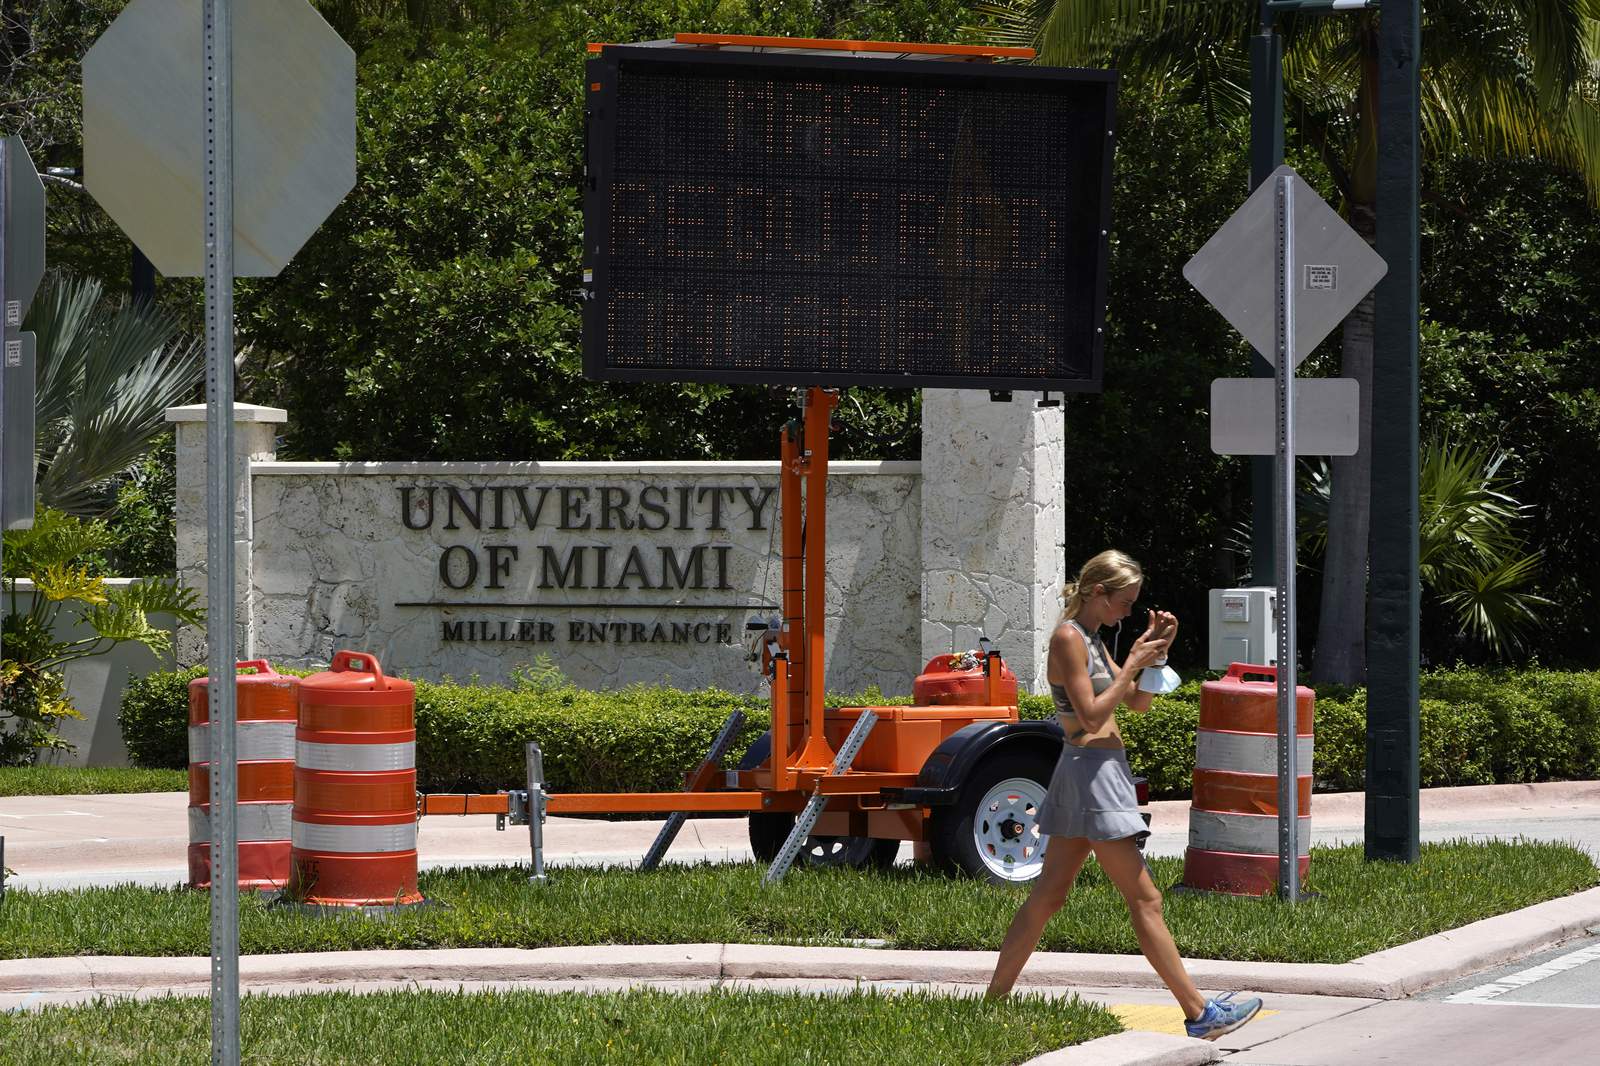 University of Miami suffers data breach in connection with cloud provider Accellion